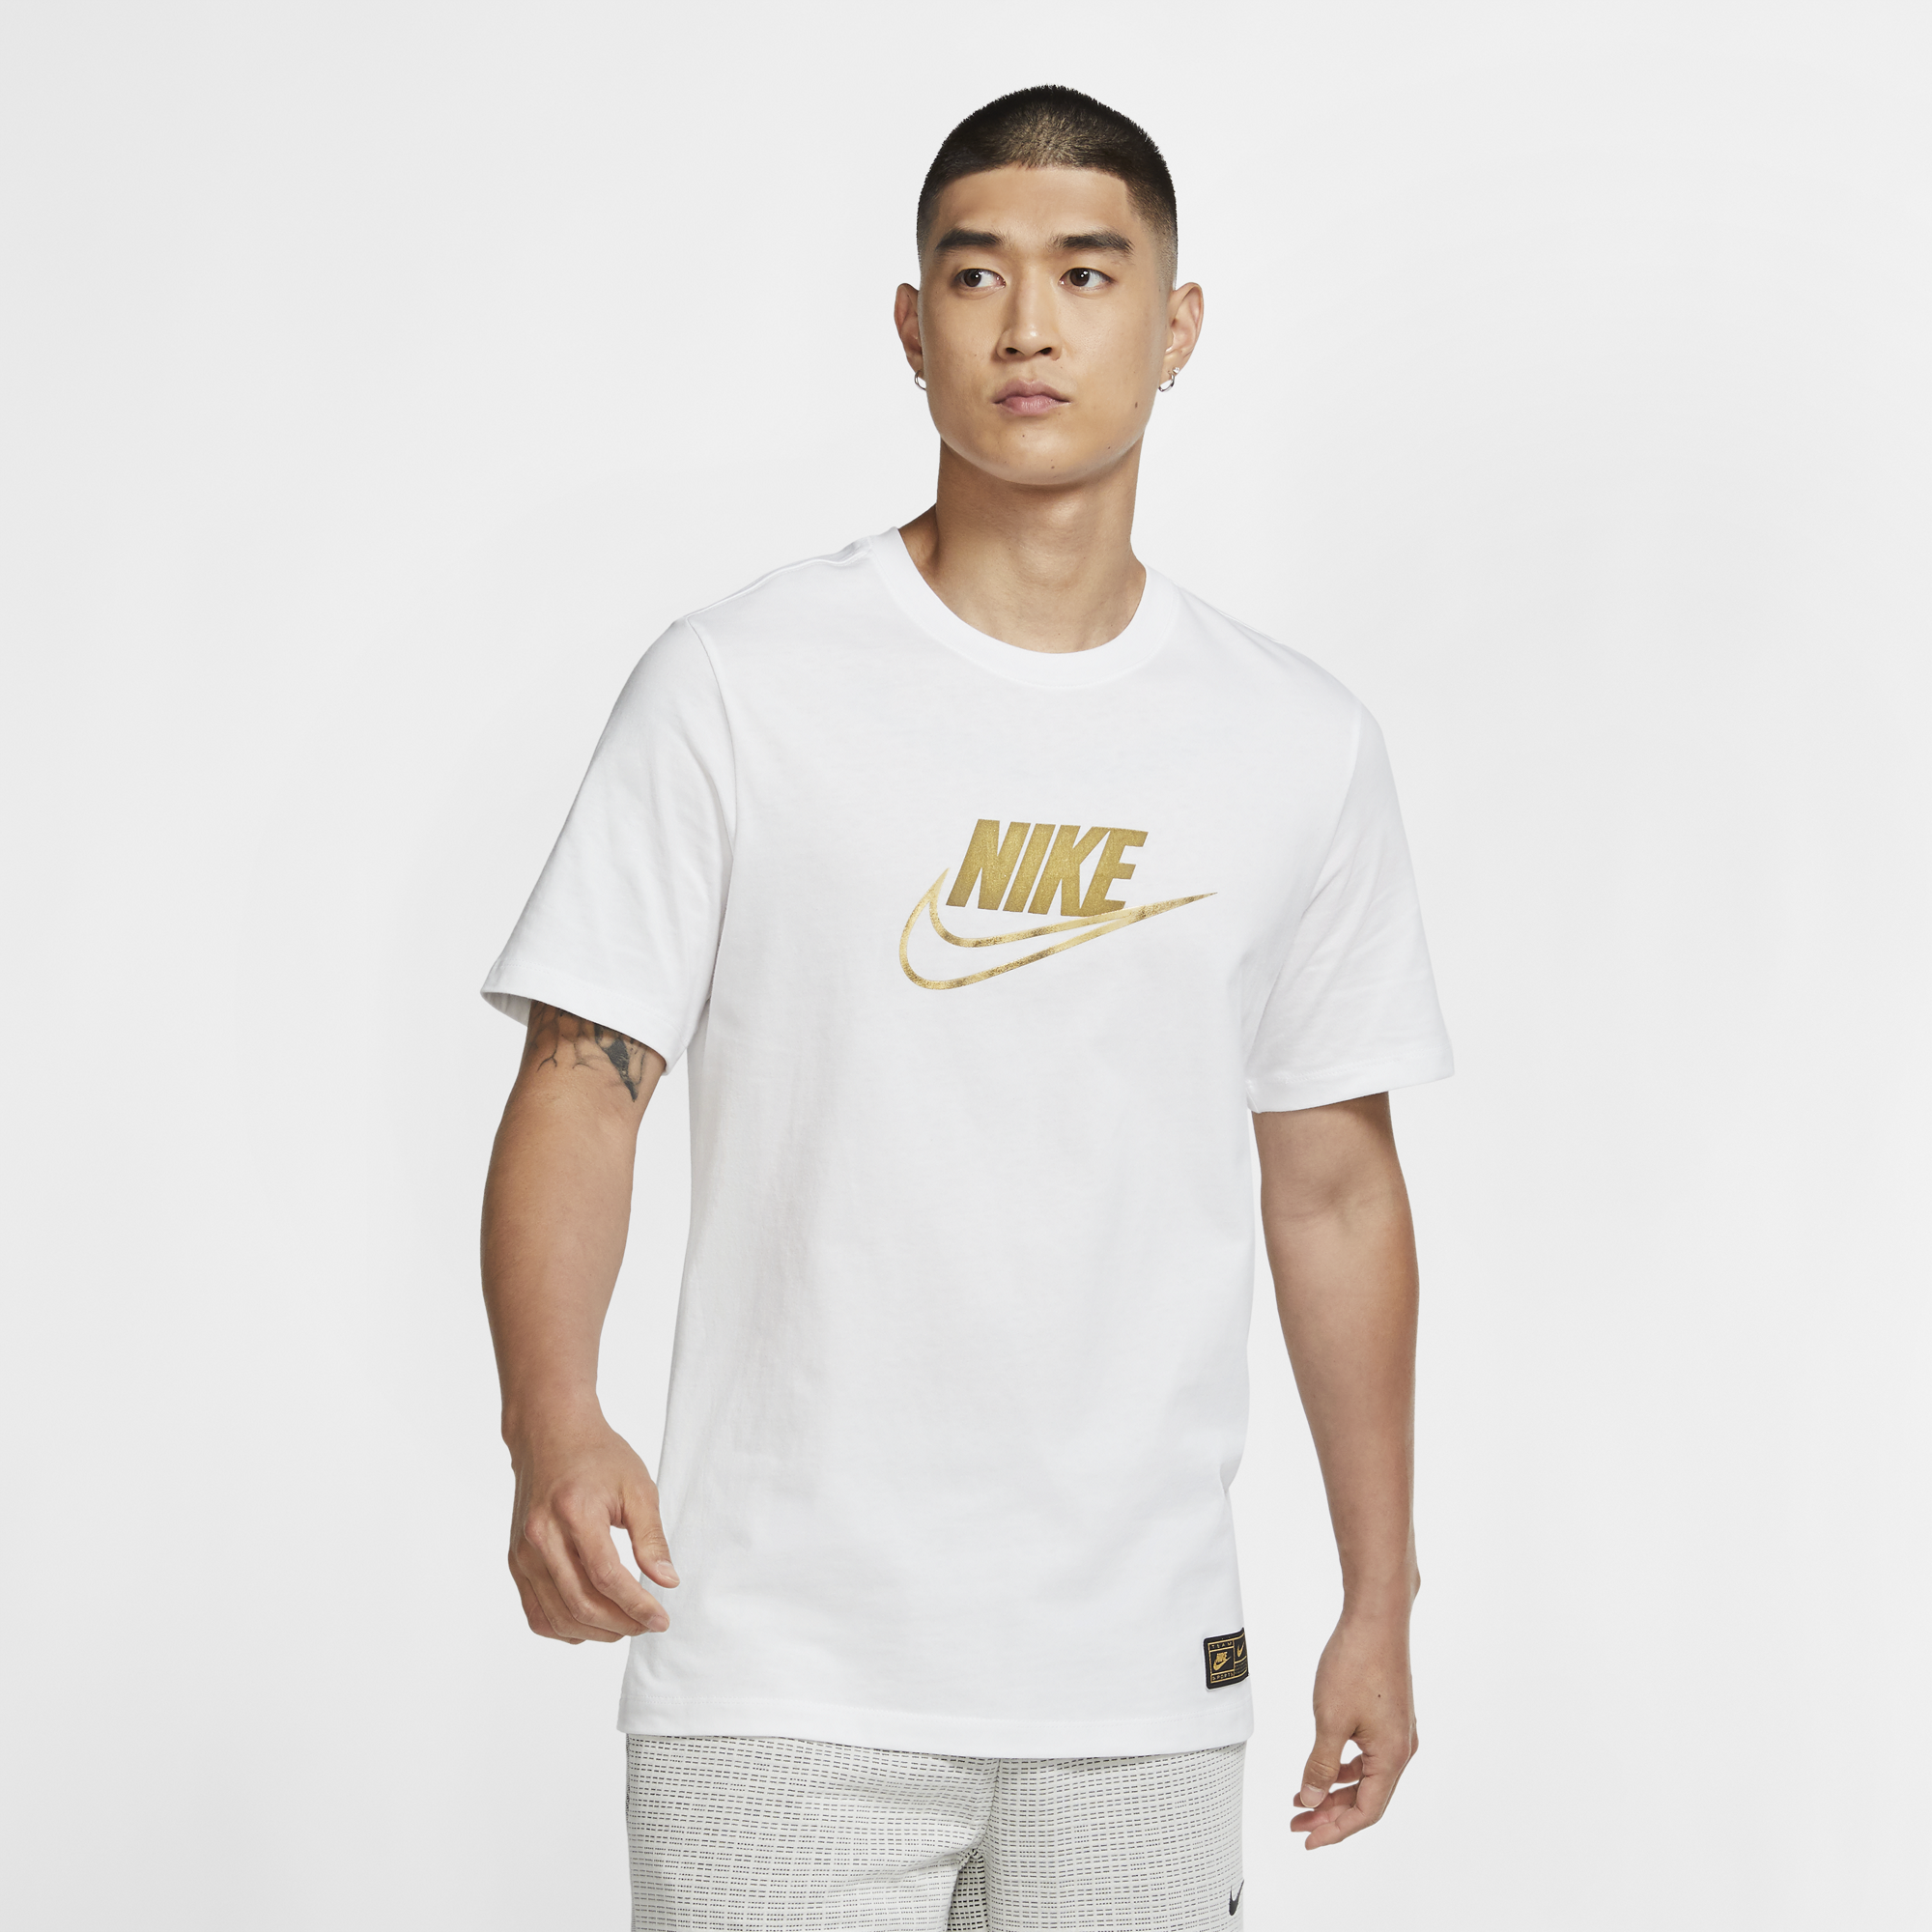 white and gold nike shirts